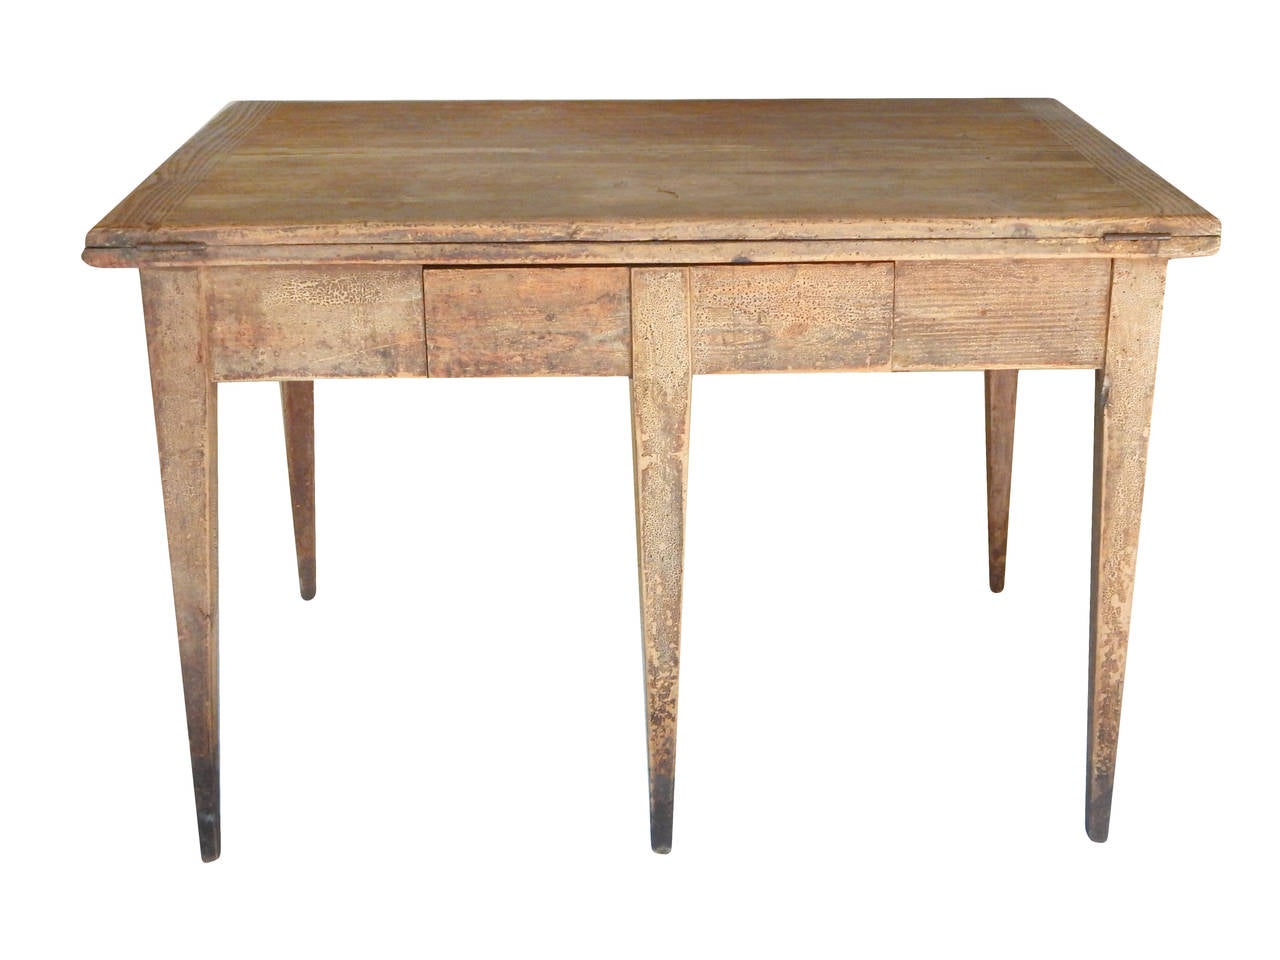 Unusual 5 legged Swedish farm table with fold over extension top. Beautiful age patina on original paint. Can be used comfortably open or closed.